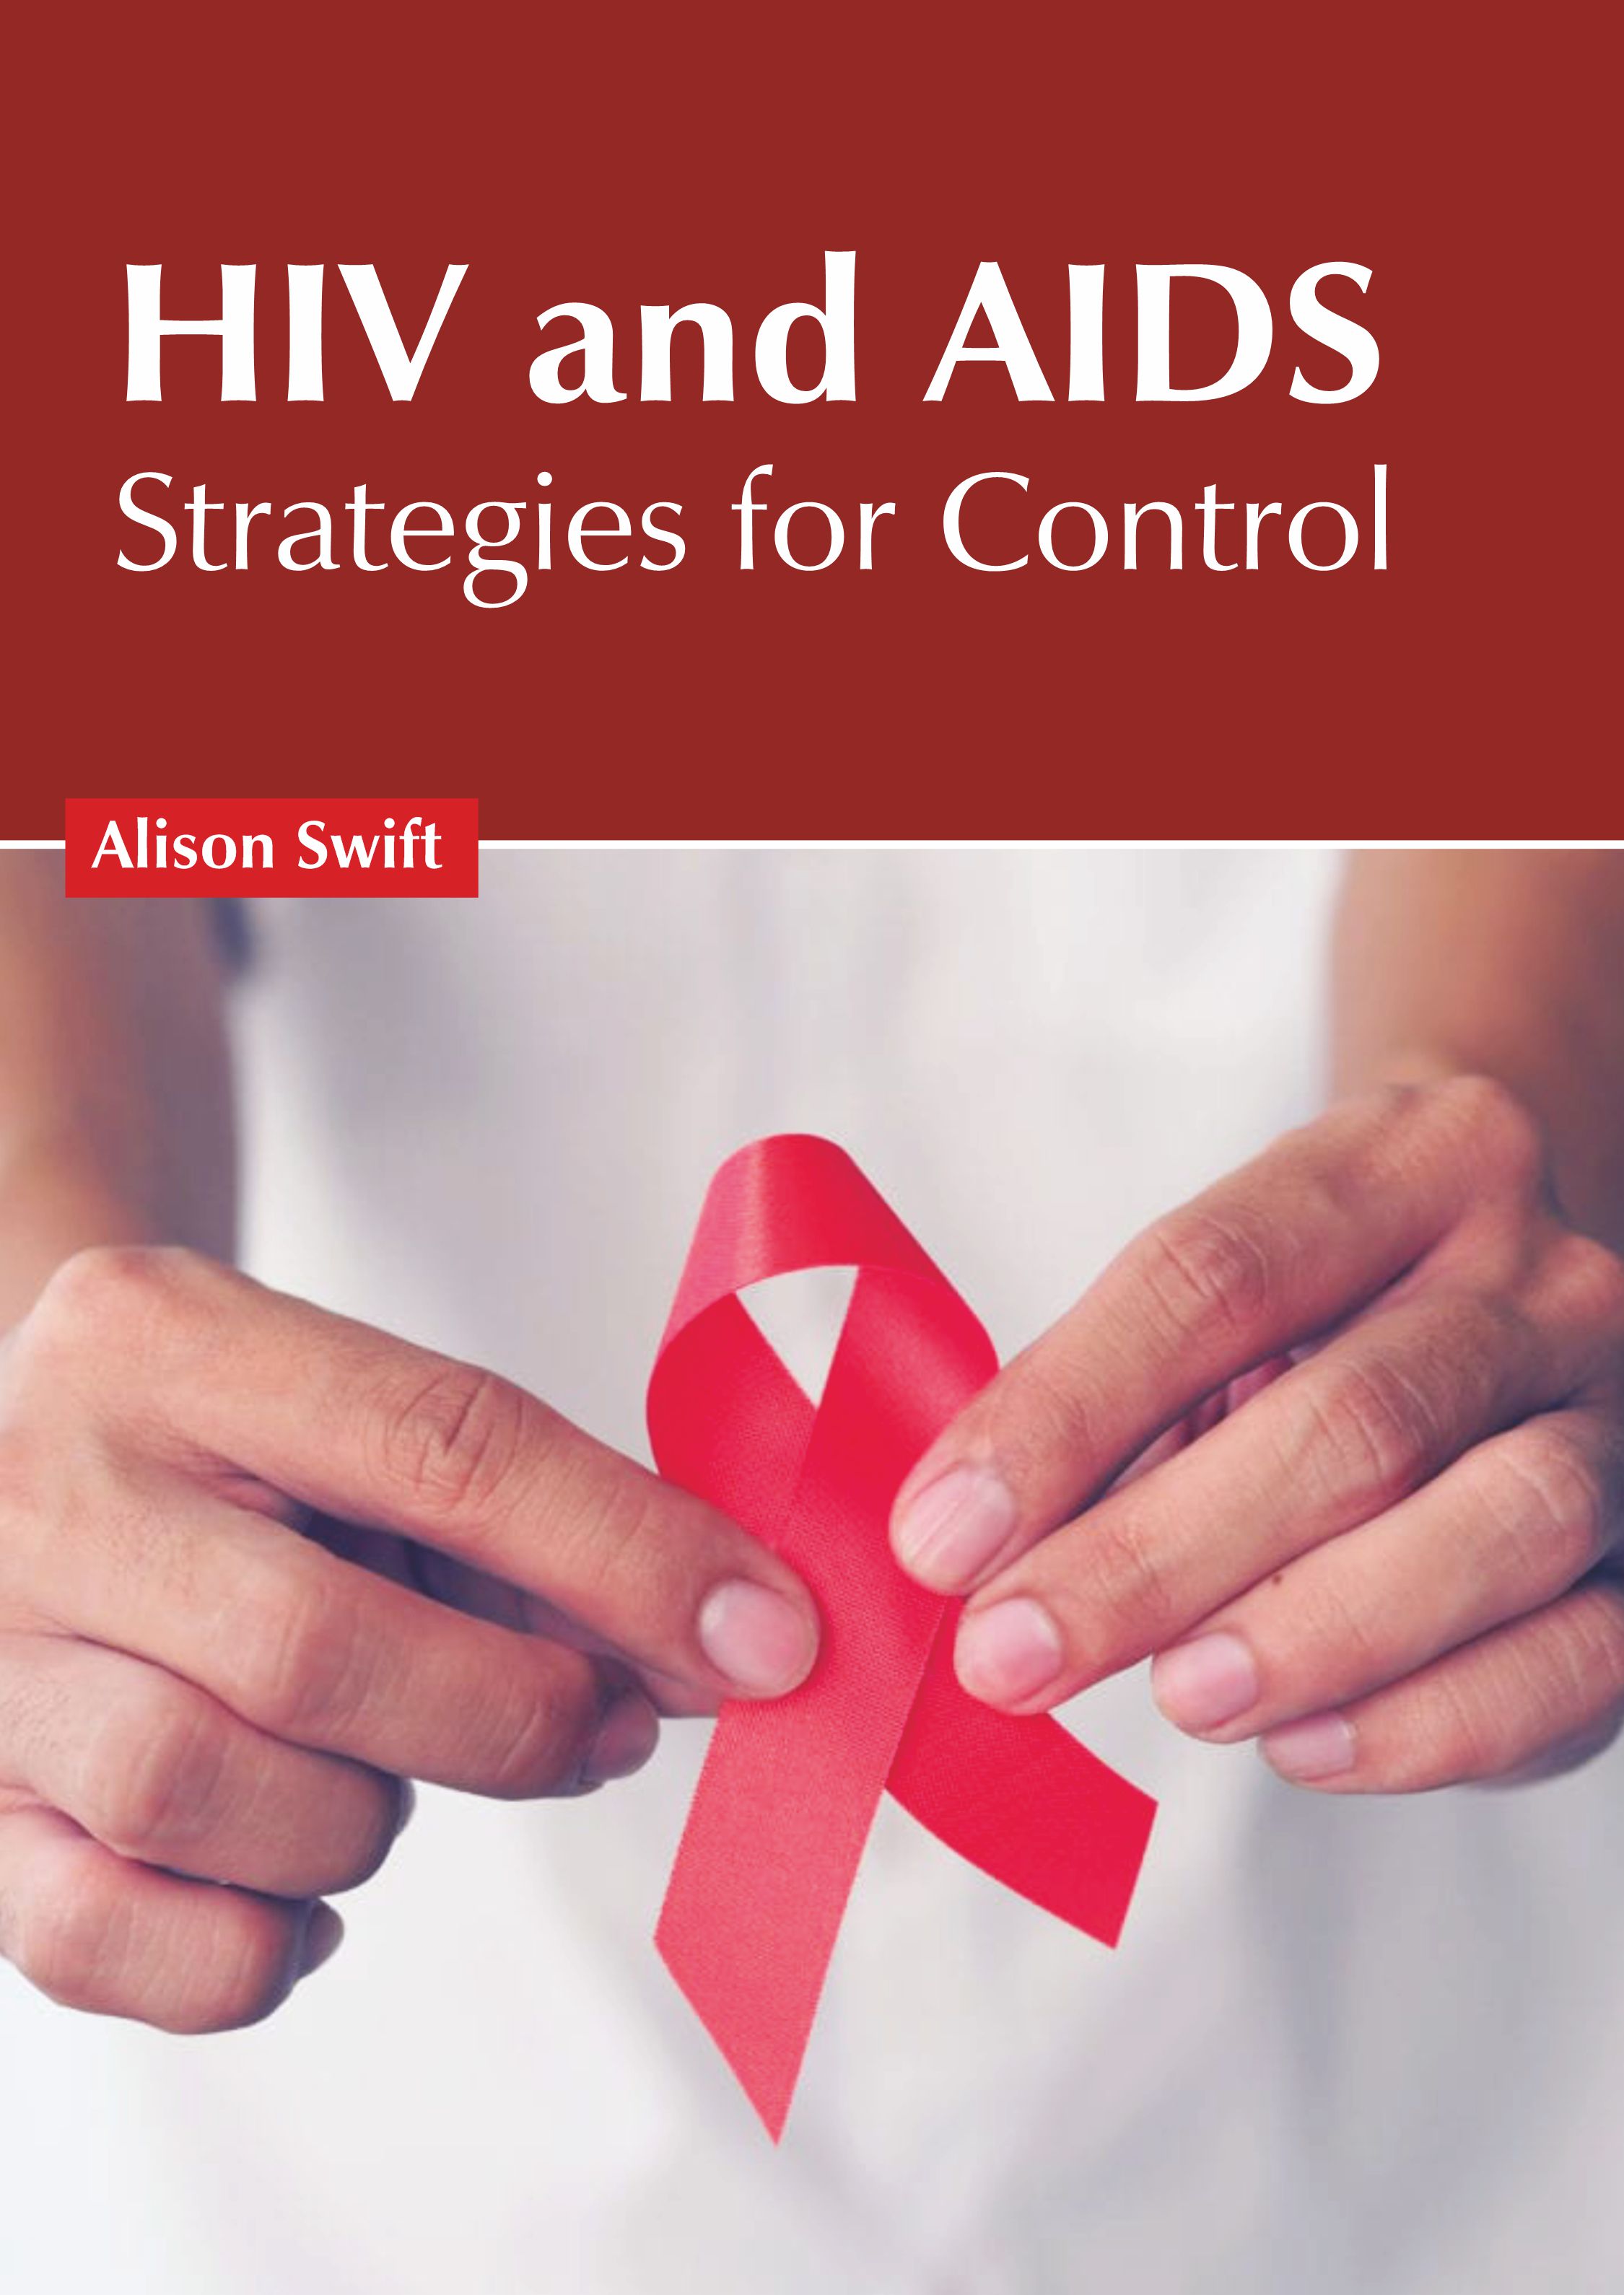 

exclusive-publishers/american-medical-publishers/hiv-and-aids-strategies-for-control-9781639272044